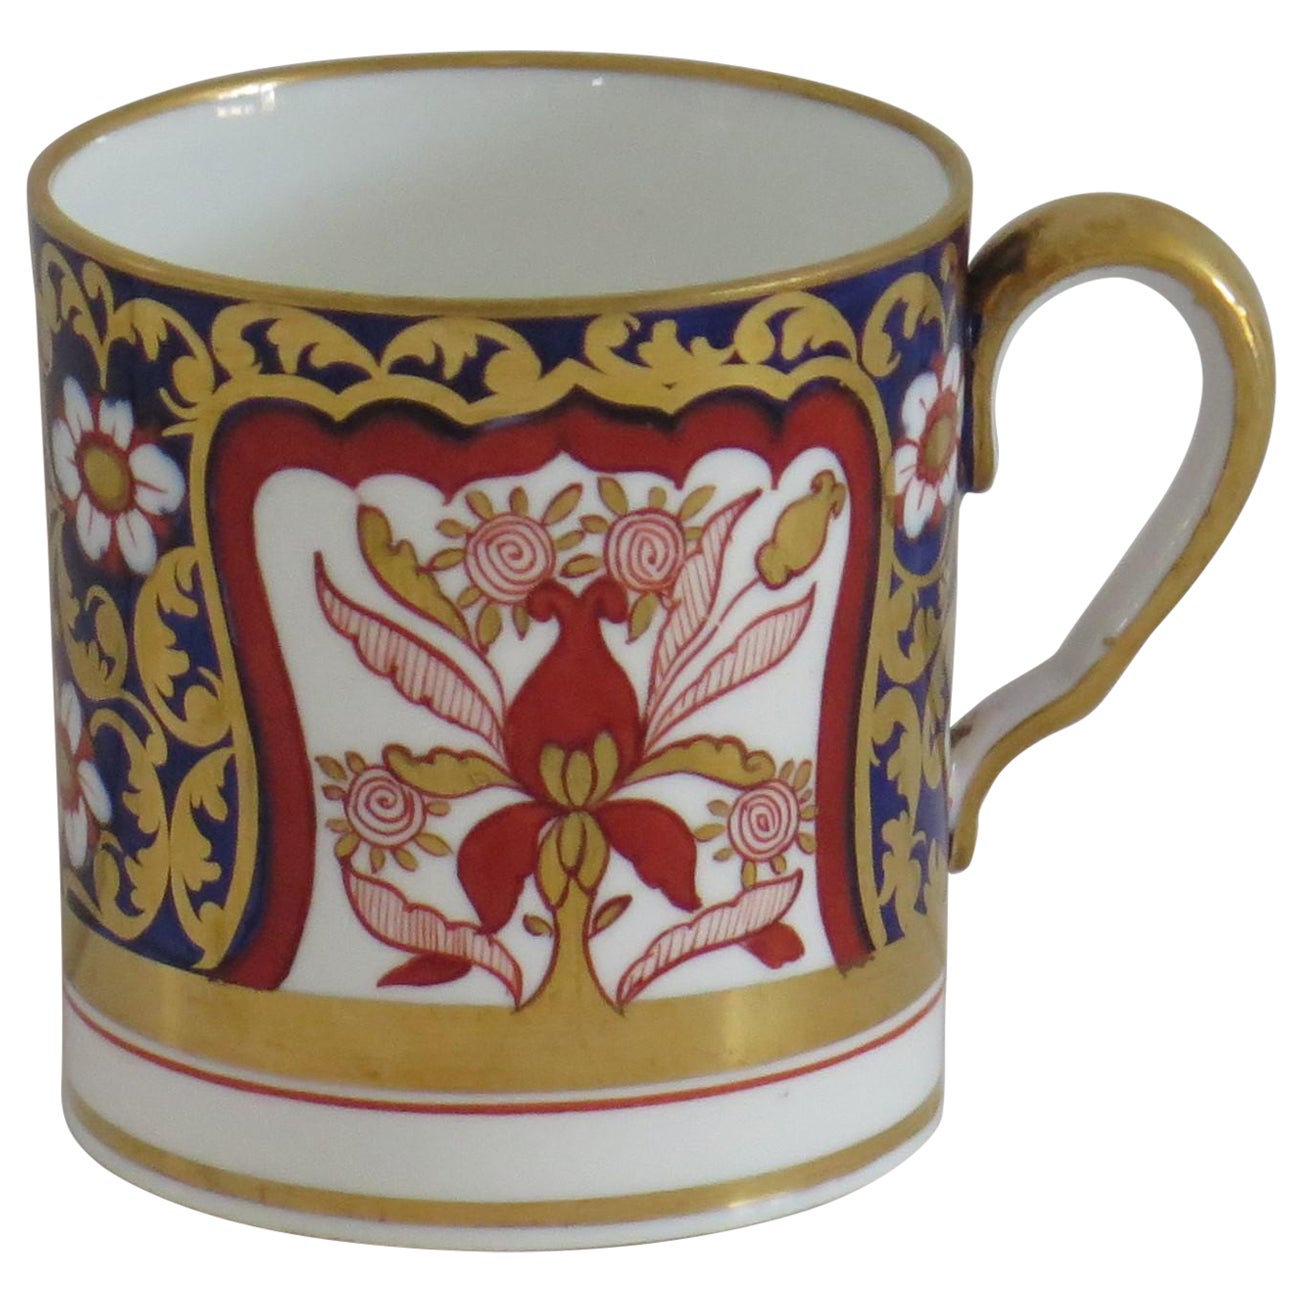 Copeland 'Spode' Porcelain Coffee Can Finely Hand Painted & Gilded, circa 1860 For Sale